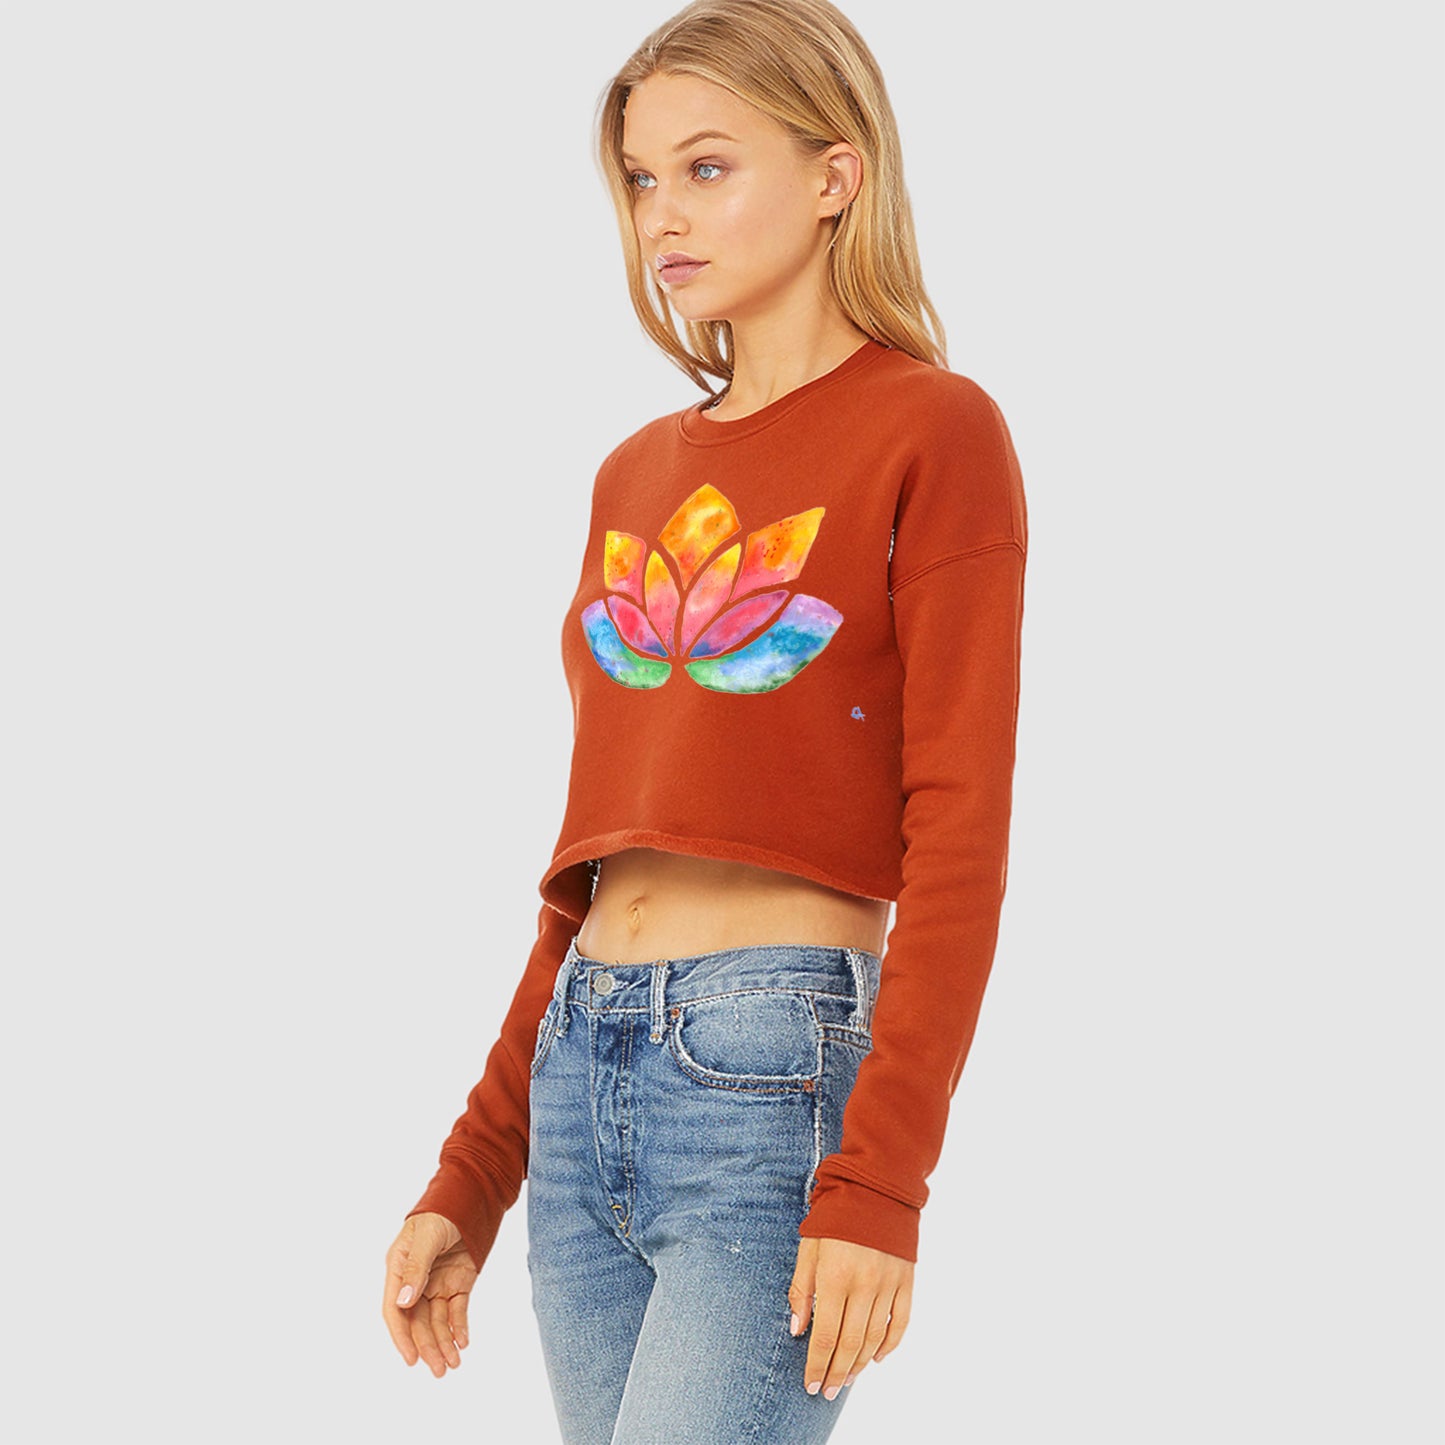 Cropped Sweatshirt with watercolour Lotus